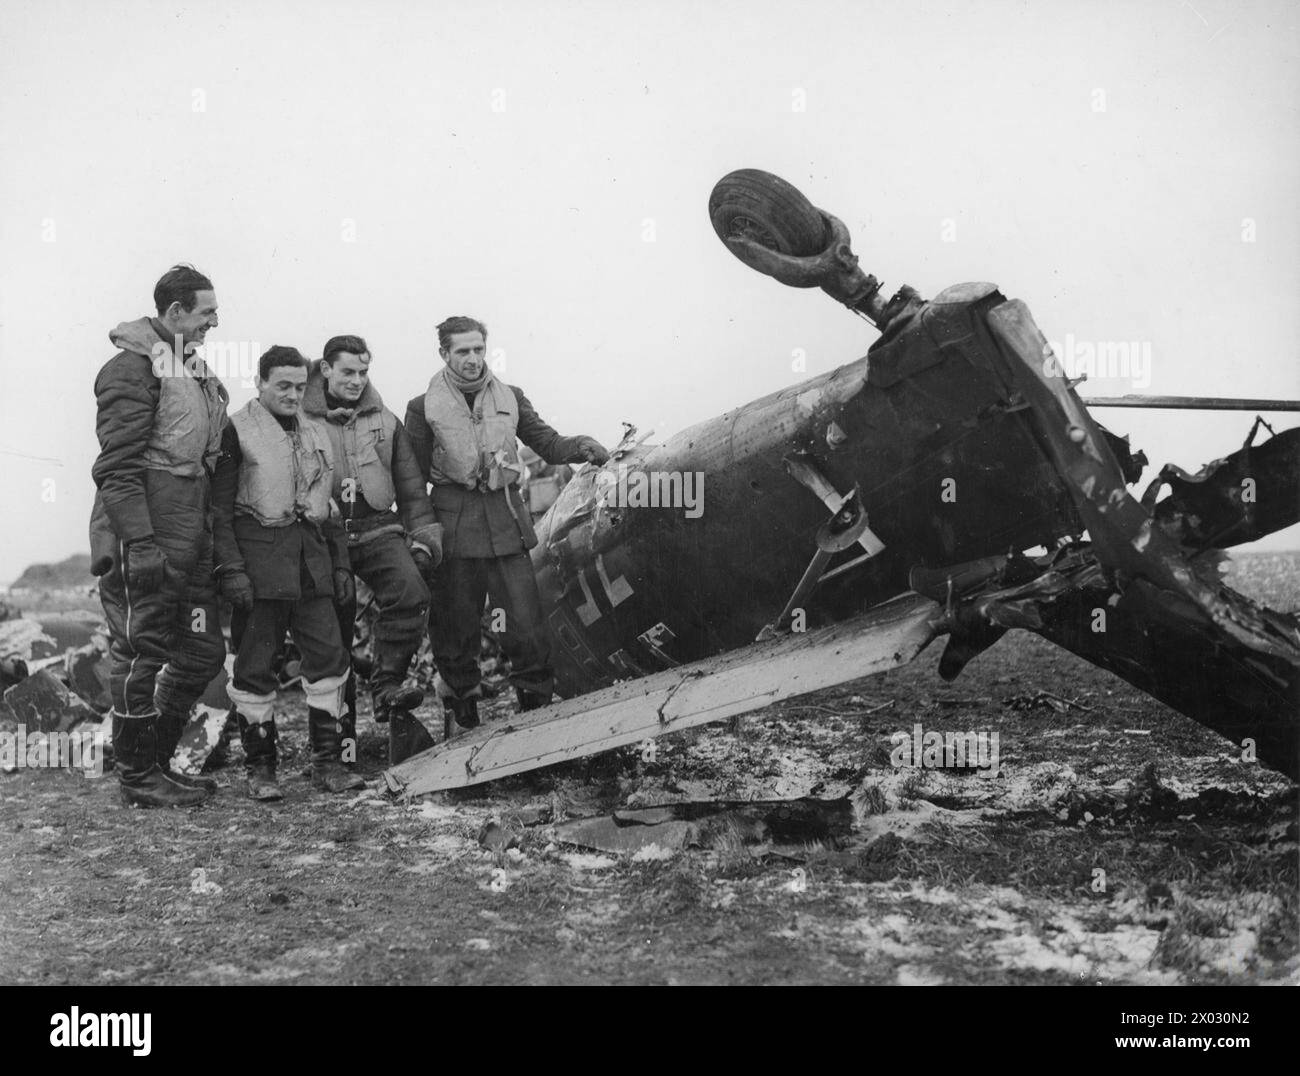 RAF FIGHTER COMMAND 1939-1945 - Spitfire pilots pose beside the wreckage of a Junkers Ju 87 Stuka, which they shot down near Manston Airfield, 5 February 1941. Airmen , L-R are Pilot Officer C.H. 'Sammy' Saunders, Sgt R. 'Titch' Havercroft, Sgt Hugh Bowen-Morris & Pilot Officer Ronald Fokes Stock Photo